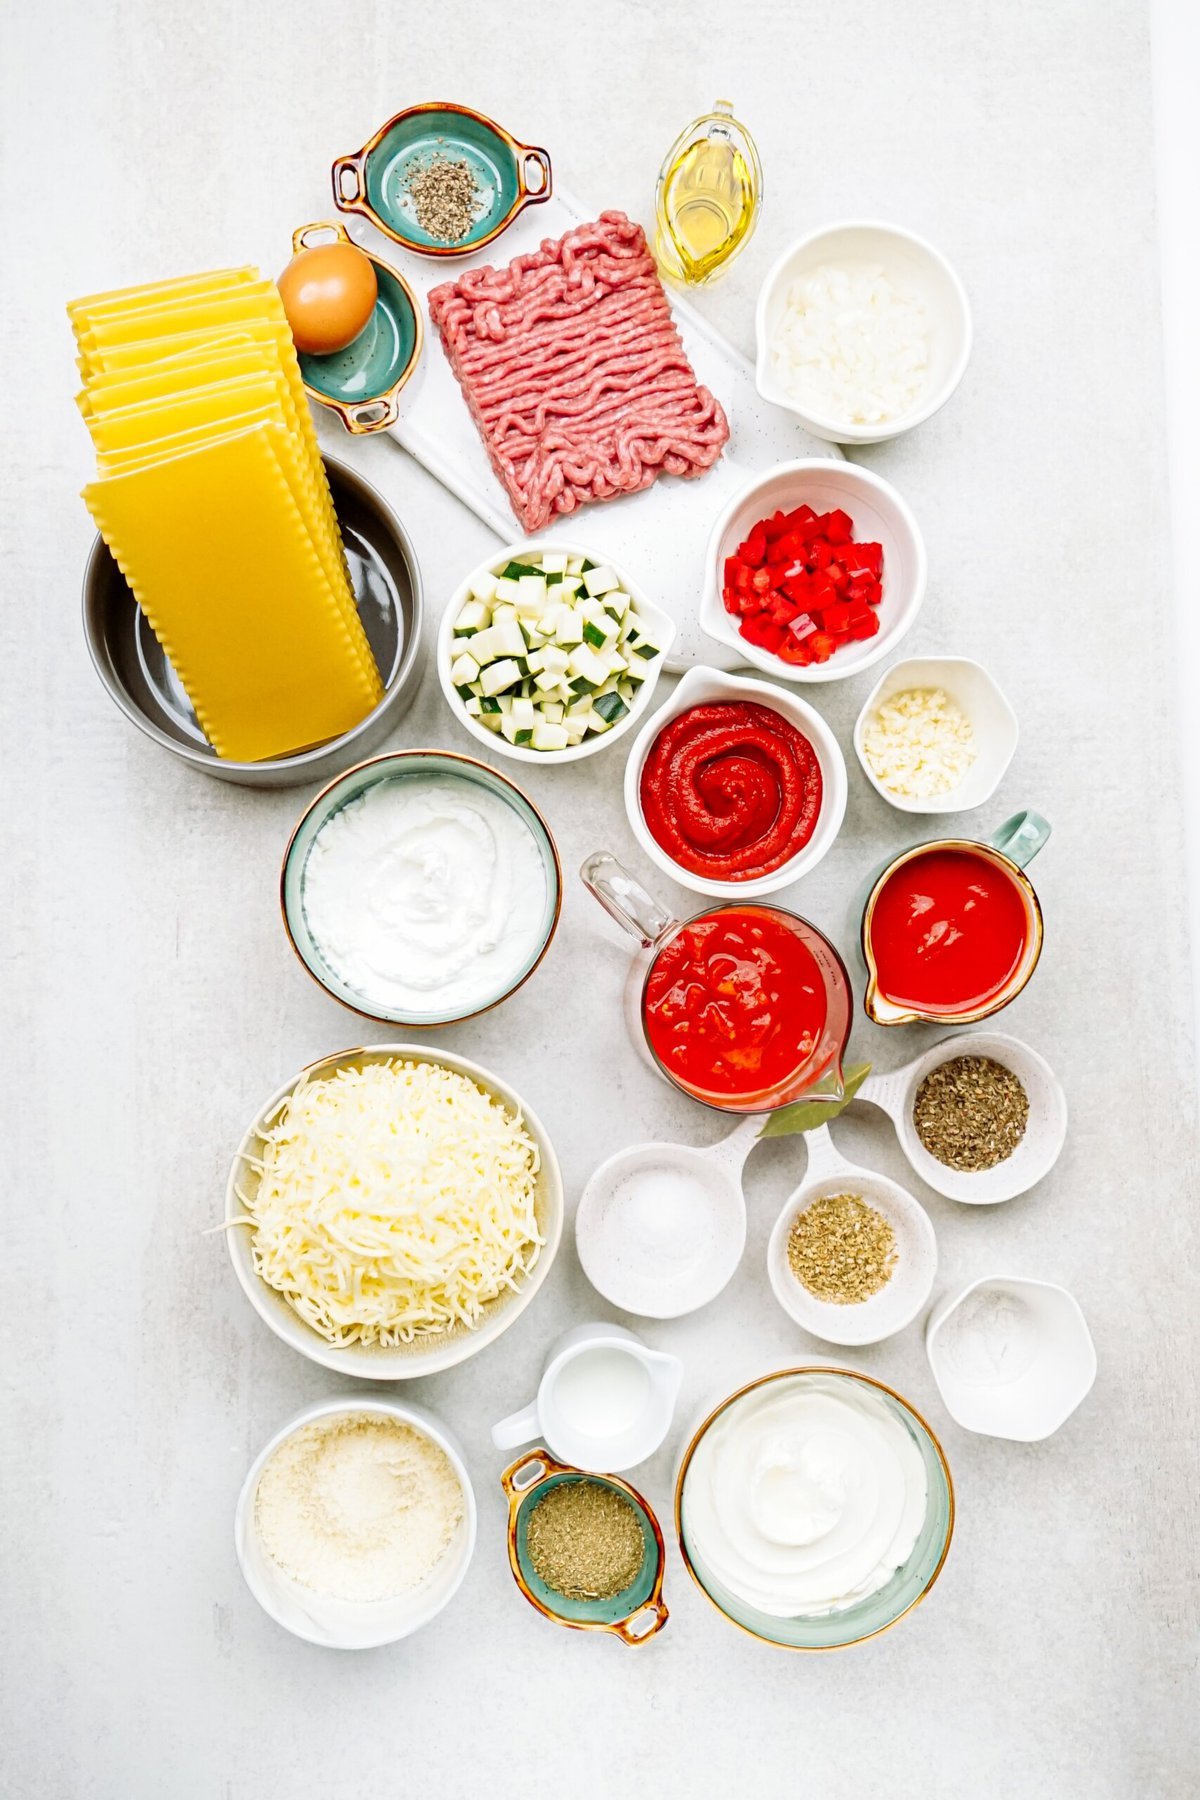 Ingredients for making lasagna laid out, including lasagna sheets, minced meat, eggs, various cheeses, seasonings, and vegetables in bowls and cups on a light-colored surface.